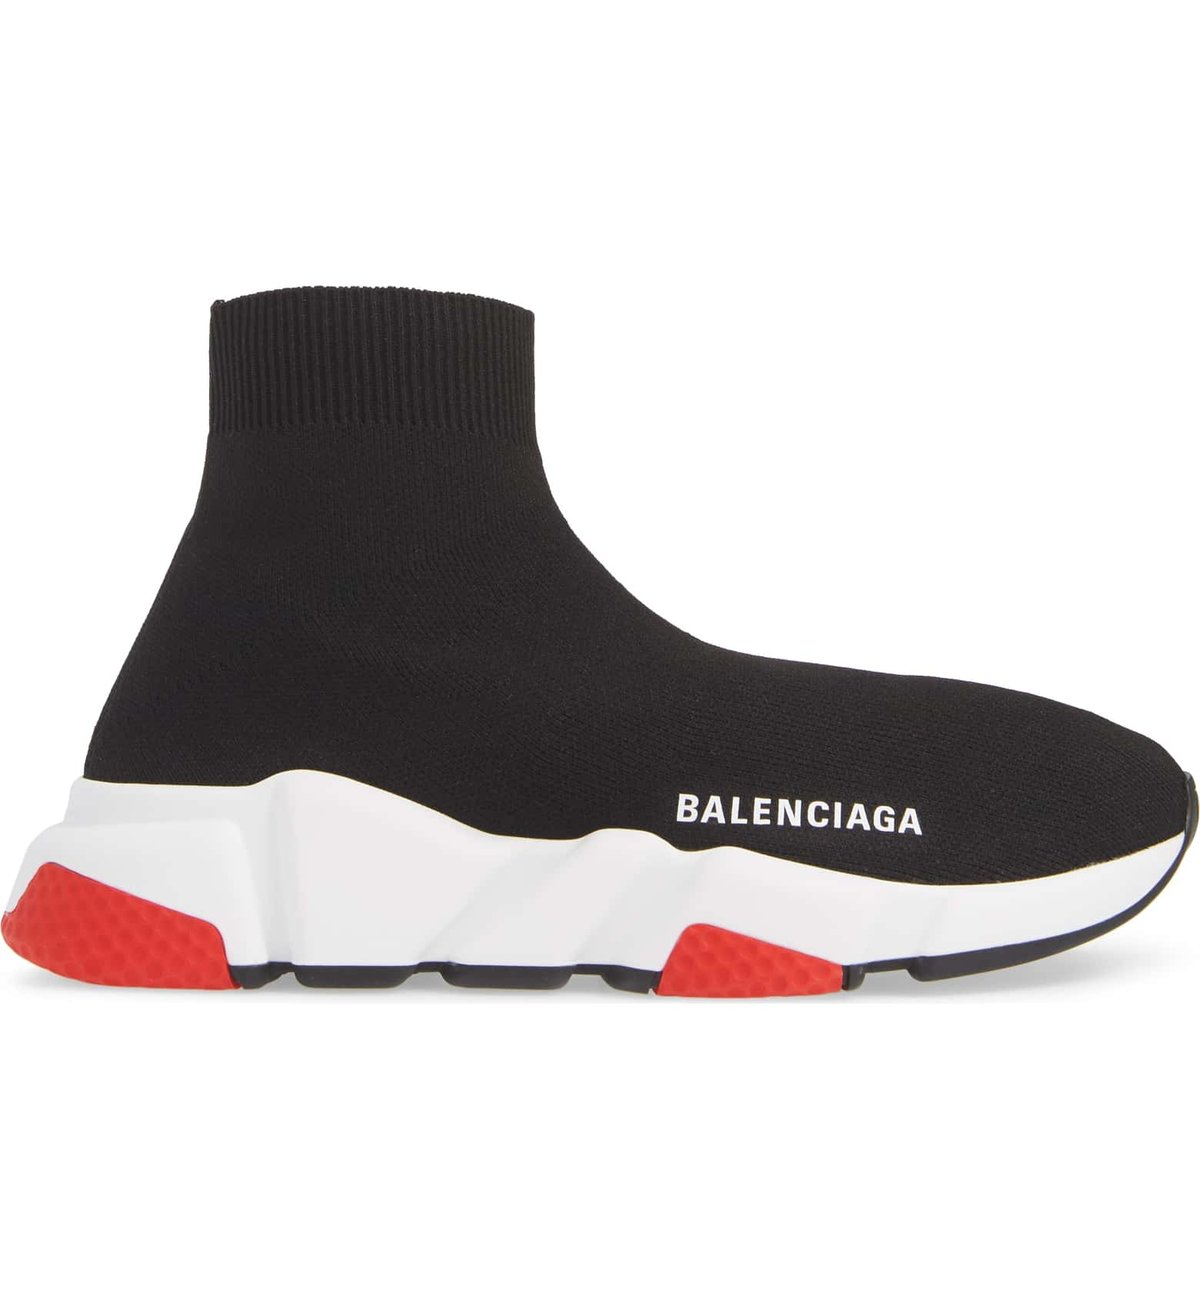 Balenciaga Speed Trainer Black Red | The Yeezy Dude